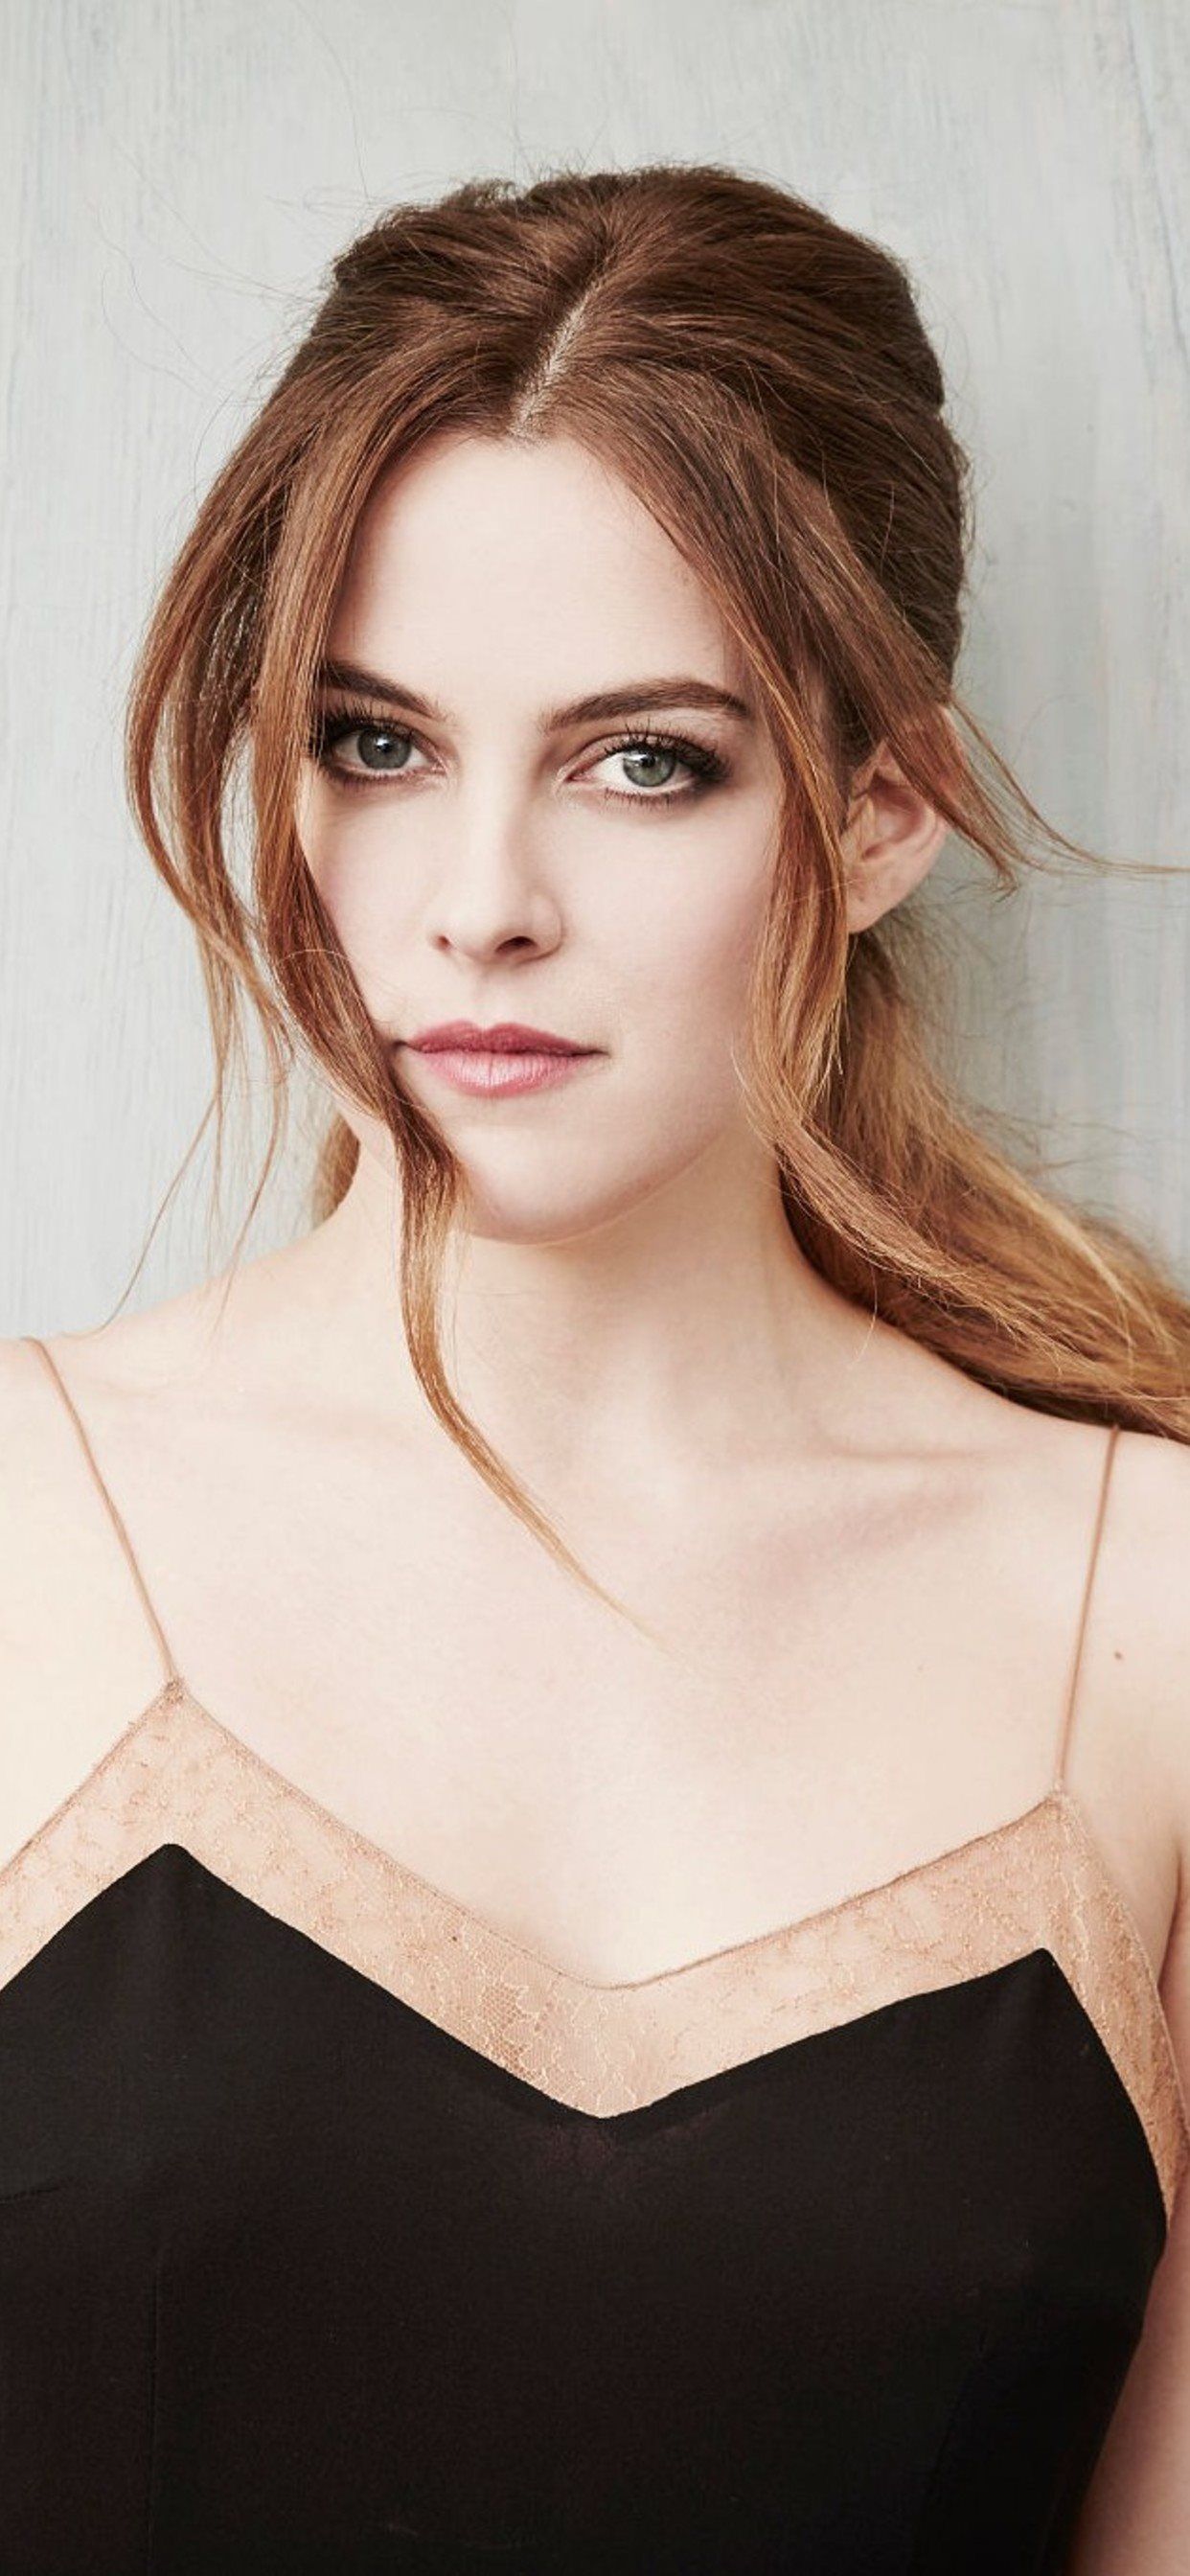 riley keough celebrity iPhone X Wallpaper Free Download